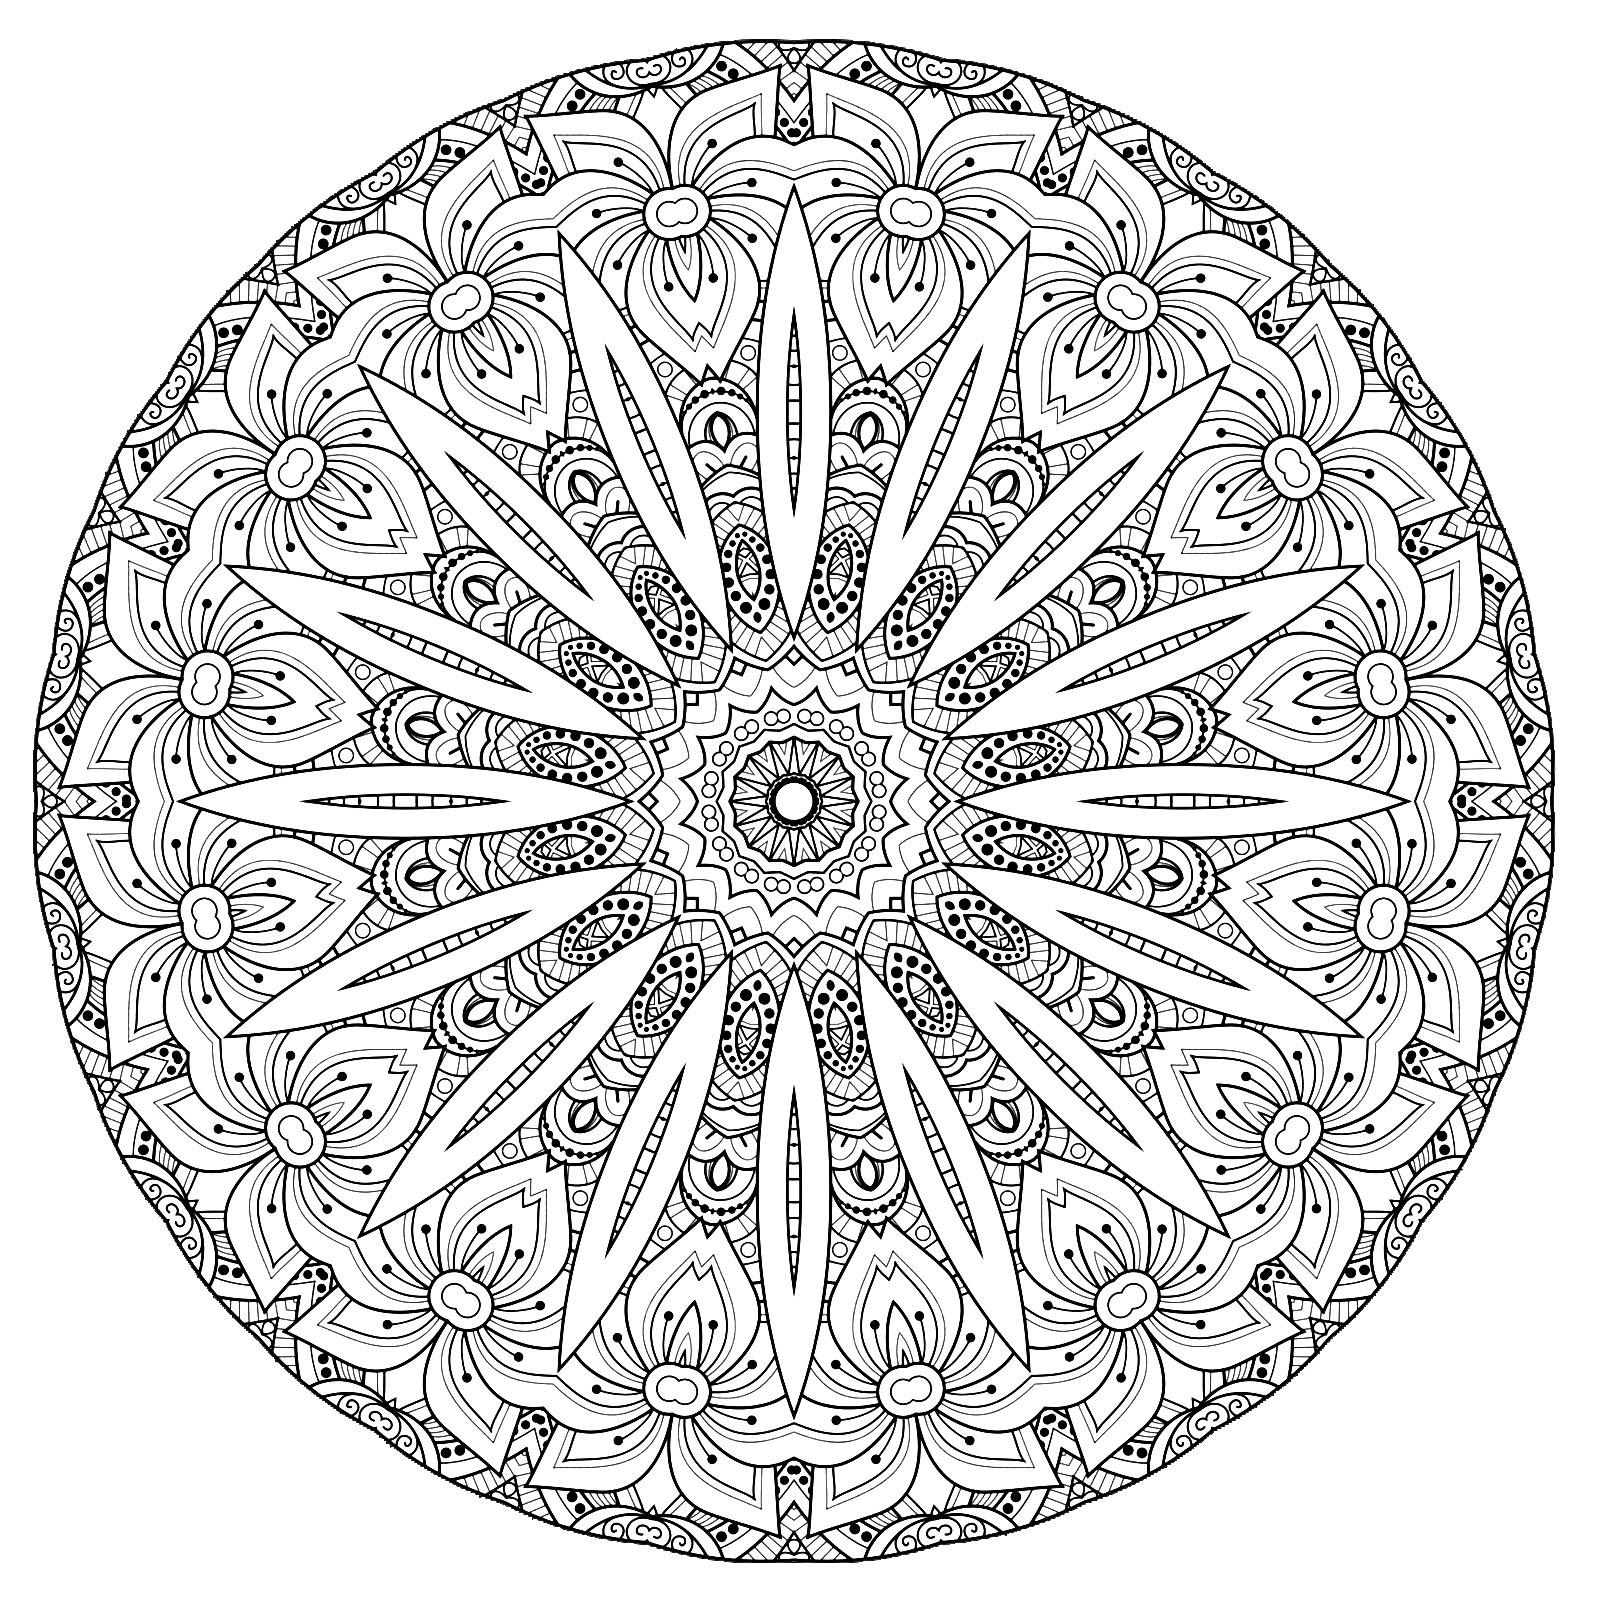 A Mandala quite difficult to color, perfect if you like to color small areas, and if you like various details, and for this one beautiful flowers.